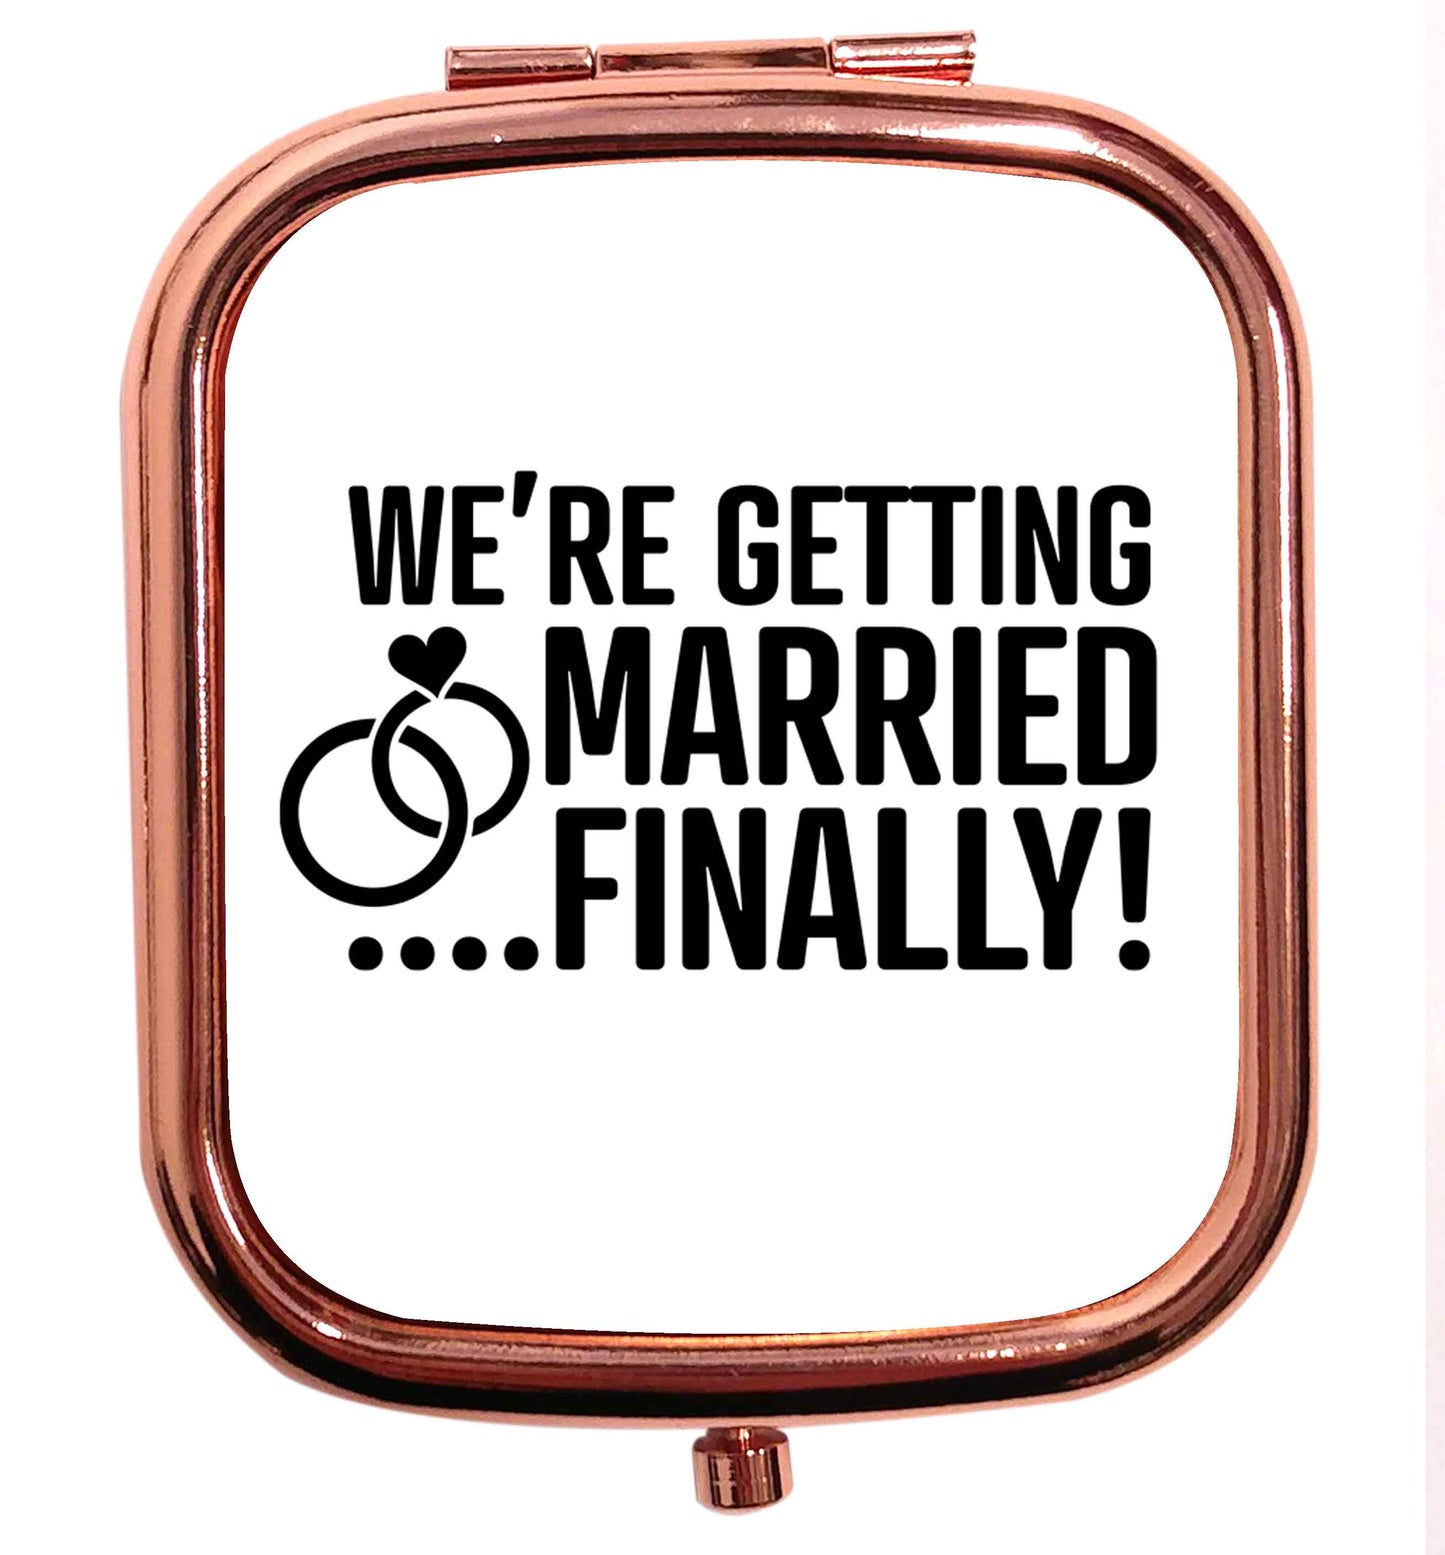 It's been a long wait but it's finally happening! Let everyone know you're celebrating your big day soon! rose gold square pocket mirror